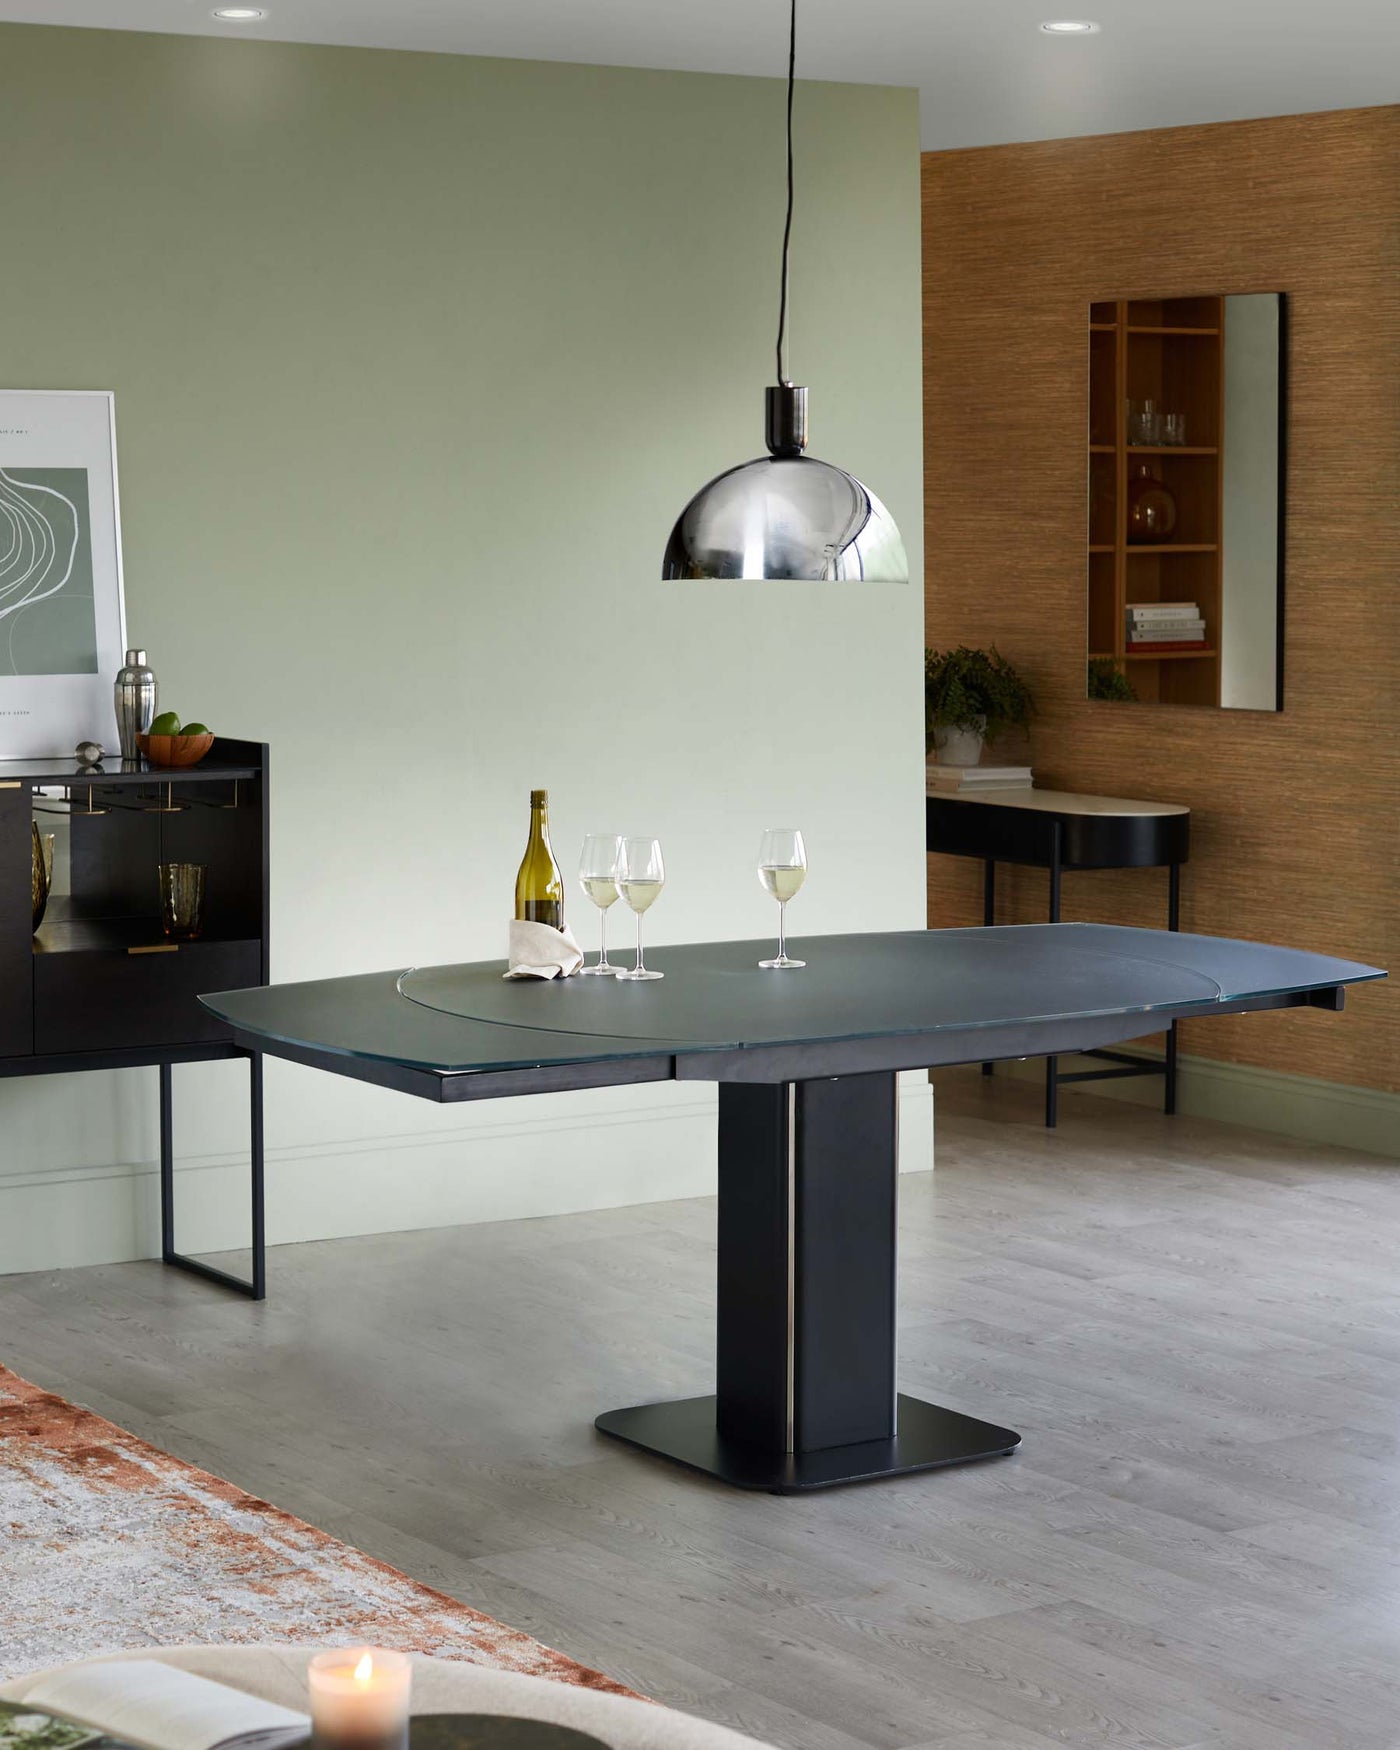 Modern dining room featuring an elegant rectangular black dining table with a sleek pedestal base, paired with a matching sideboard in the background, and a stylish metallic pendant light hanging above.